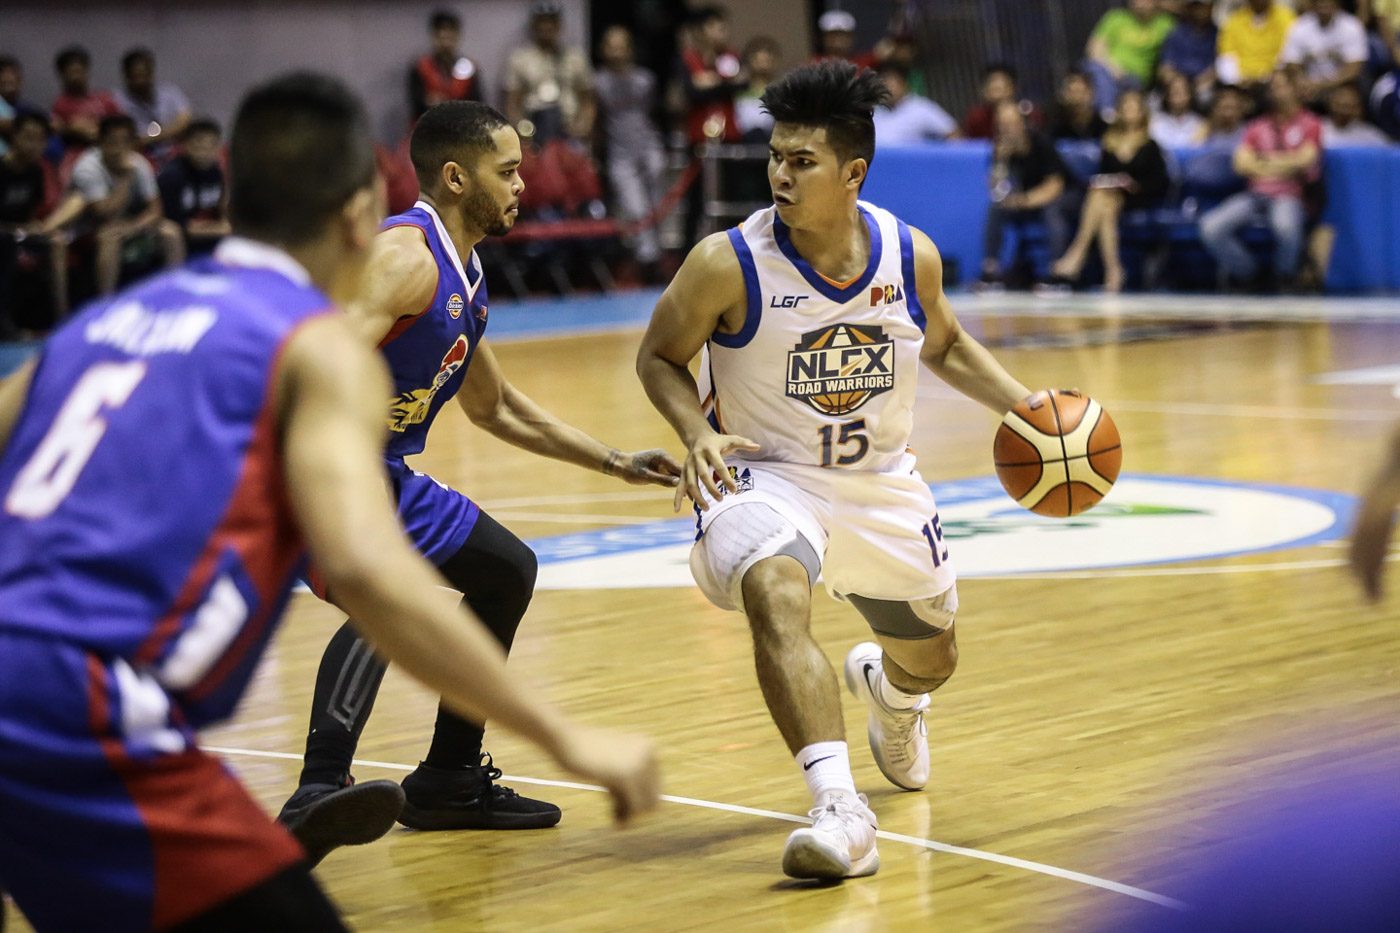 Ravena’s offensive explosions aside, Guiao wants more from NLEX after back-to-back losses